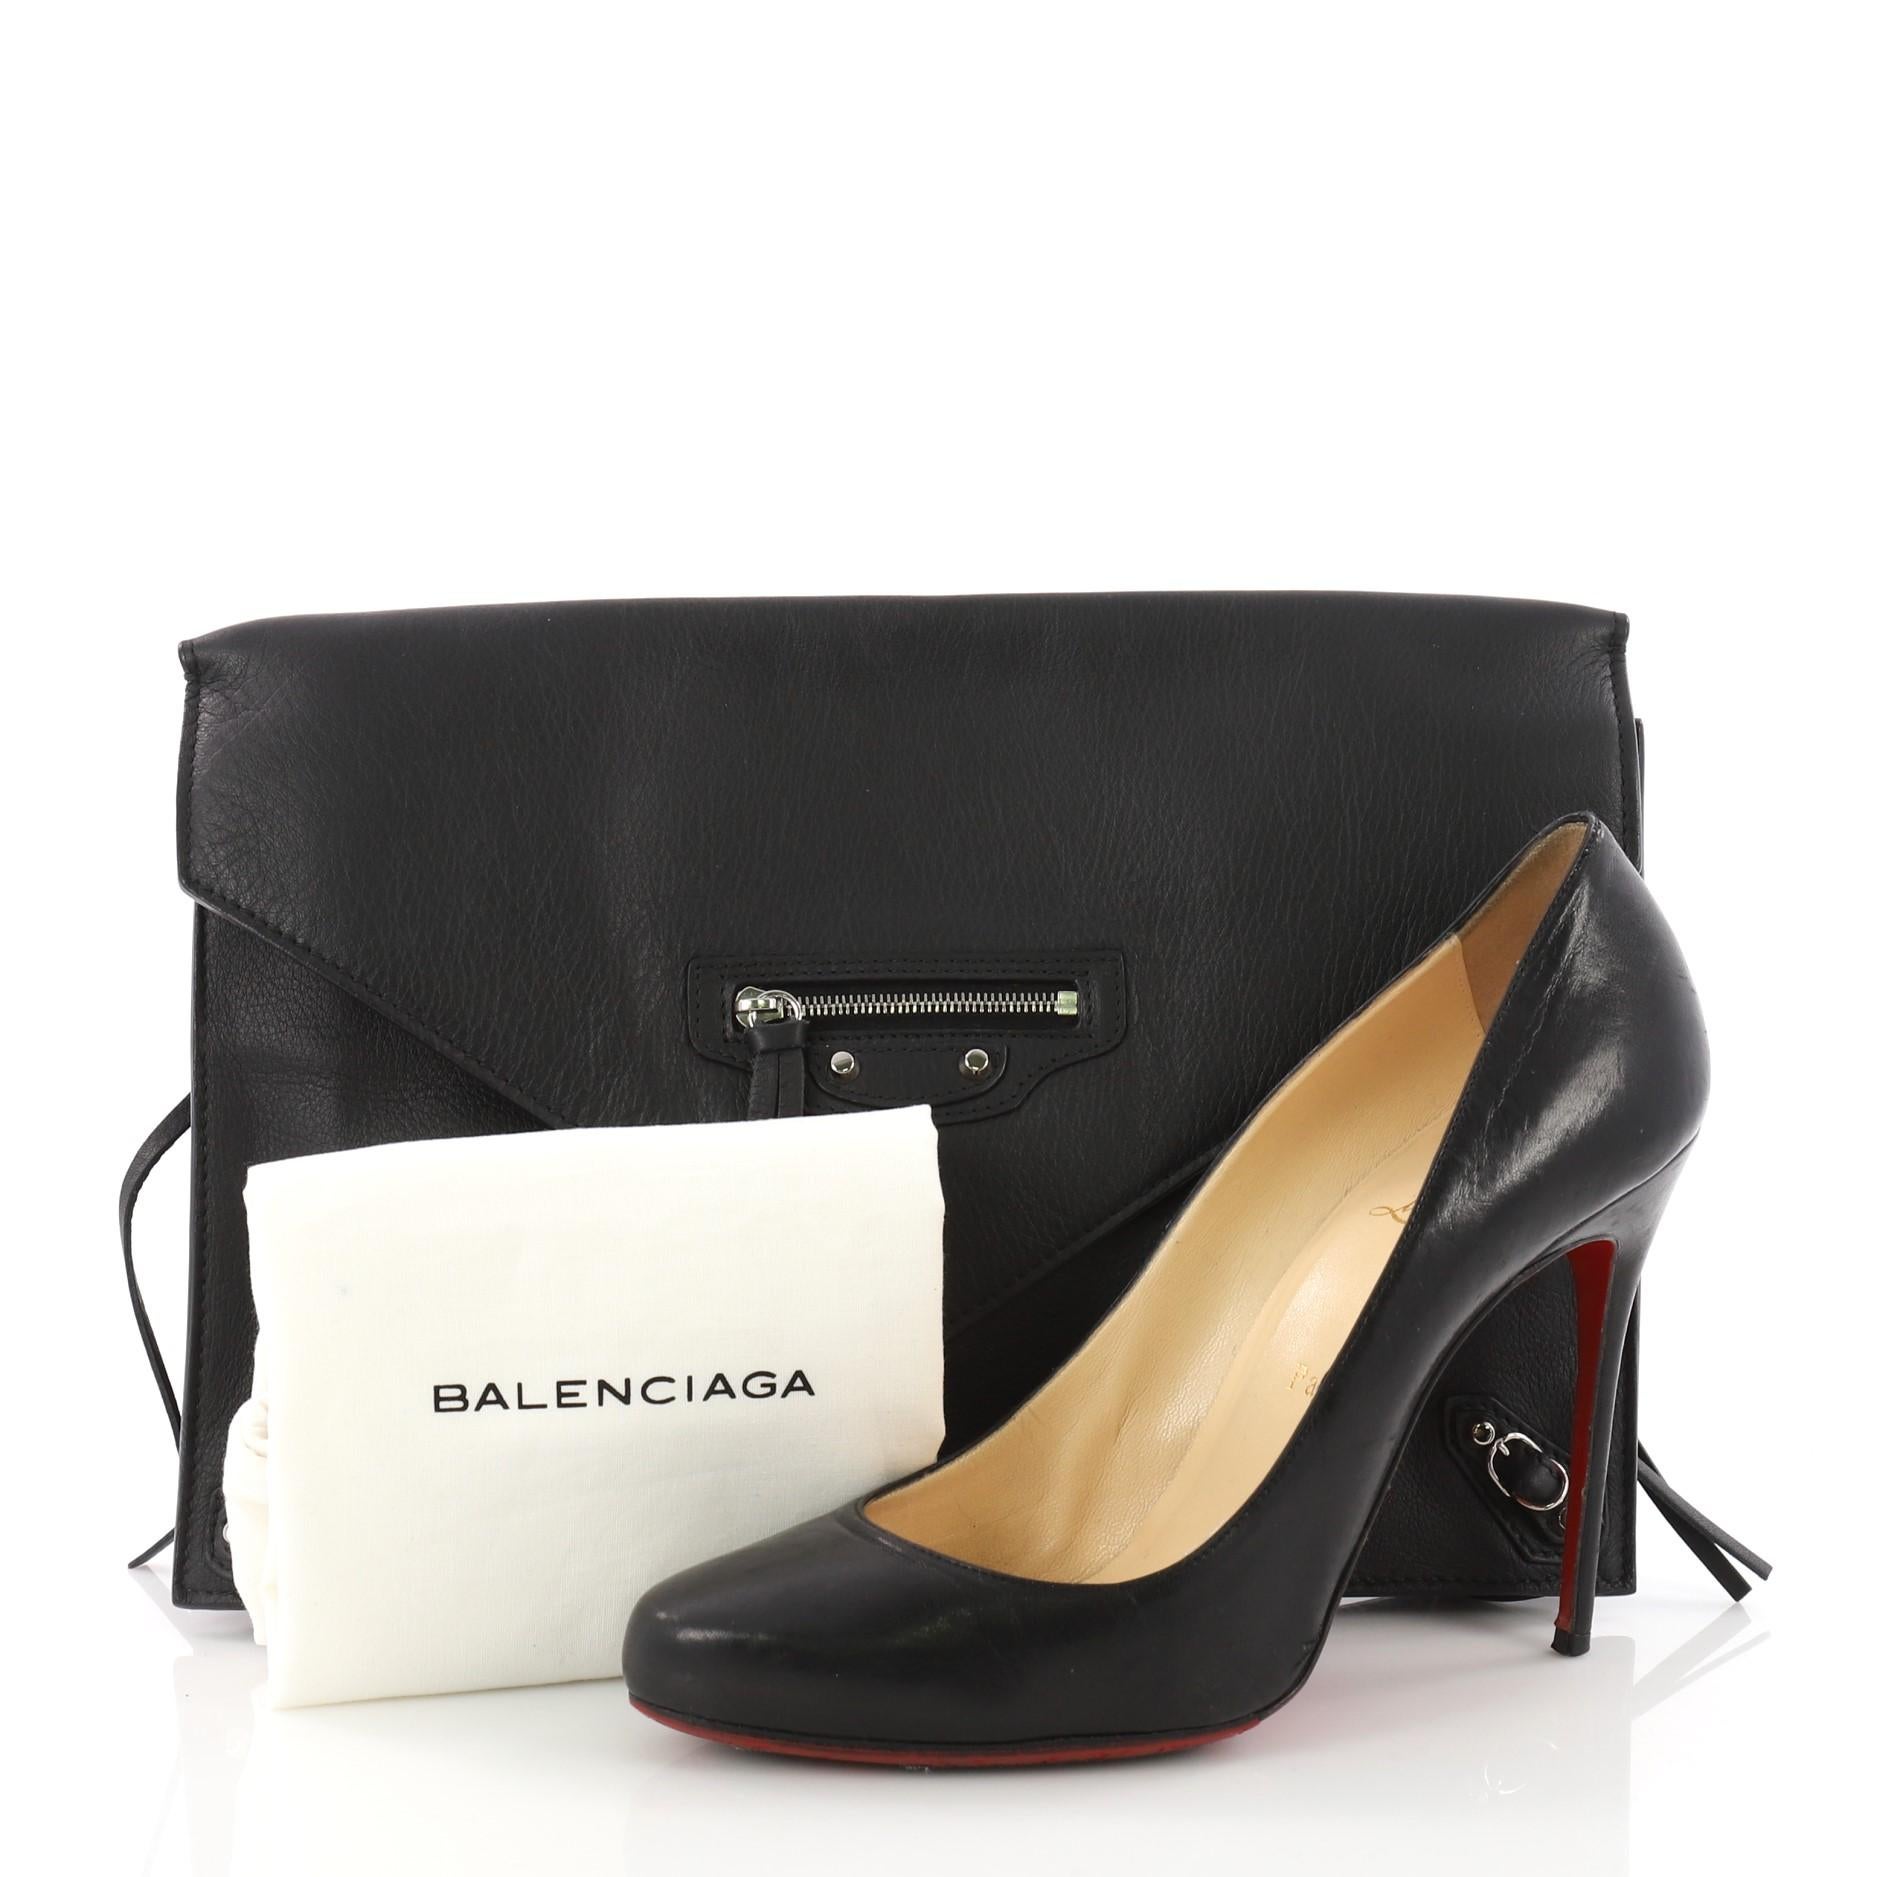 This authentic Balenciaga Papier Sight Clutch Classic Studs Leather showcases an elegant yet edgy style perfect for day-to-evening looks. Constructed in black leather, this chic clutch features Balenciaga's signature classic studs and buckle detail,